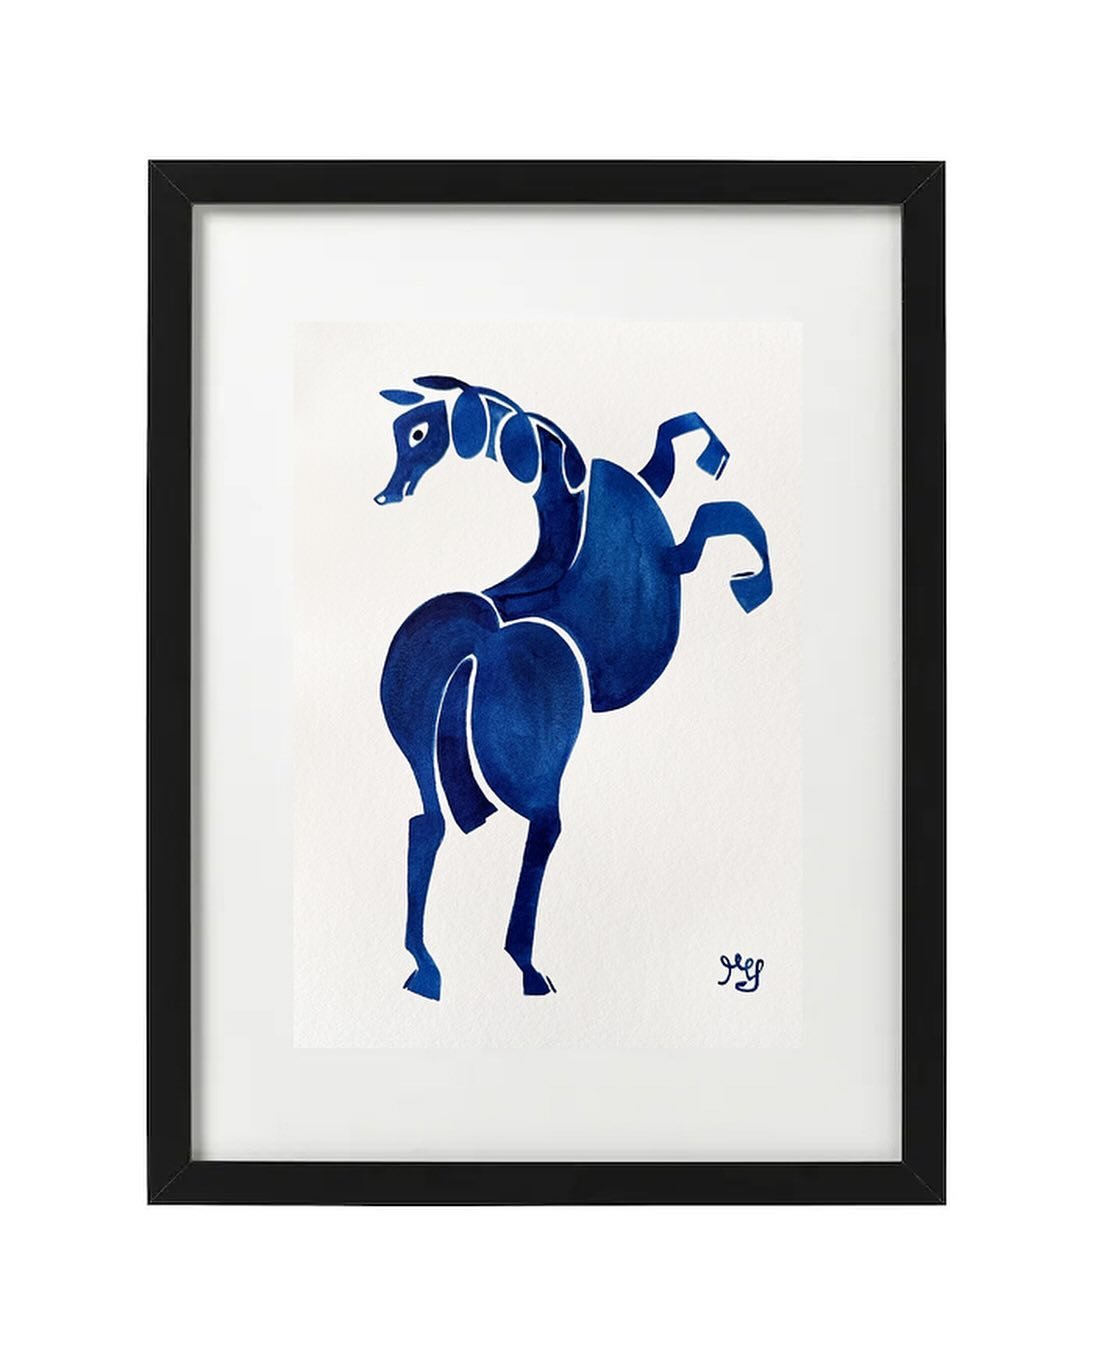 Two new works available at curata.co from the blue ink Cheval series in a Henri Matisse Blue Nudes style painting with my signature horse subject.

During my trip to Valencia, I stumbled across a print shop specialising in risography called per(r)uch